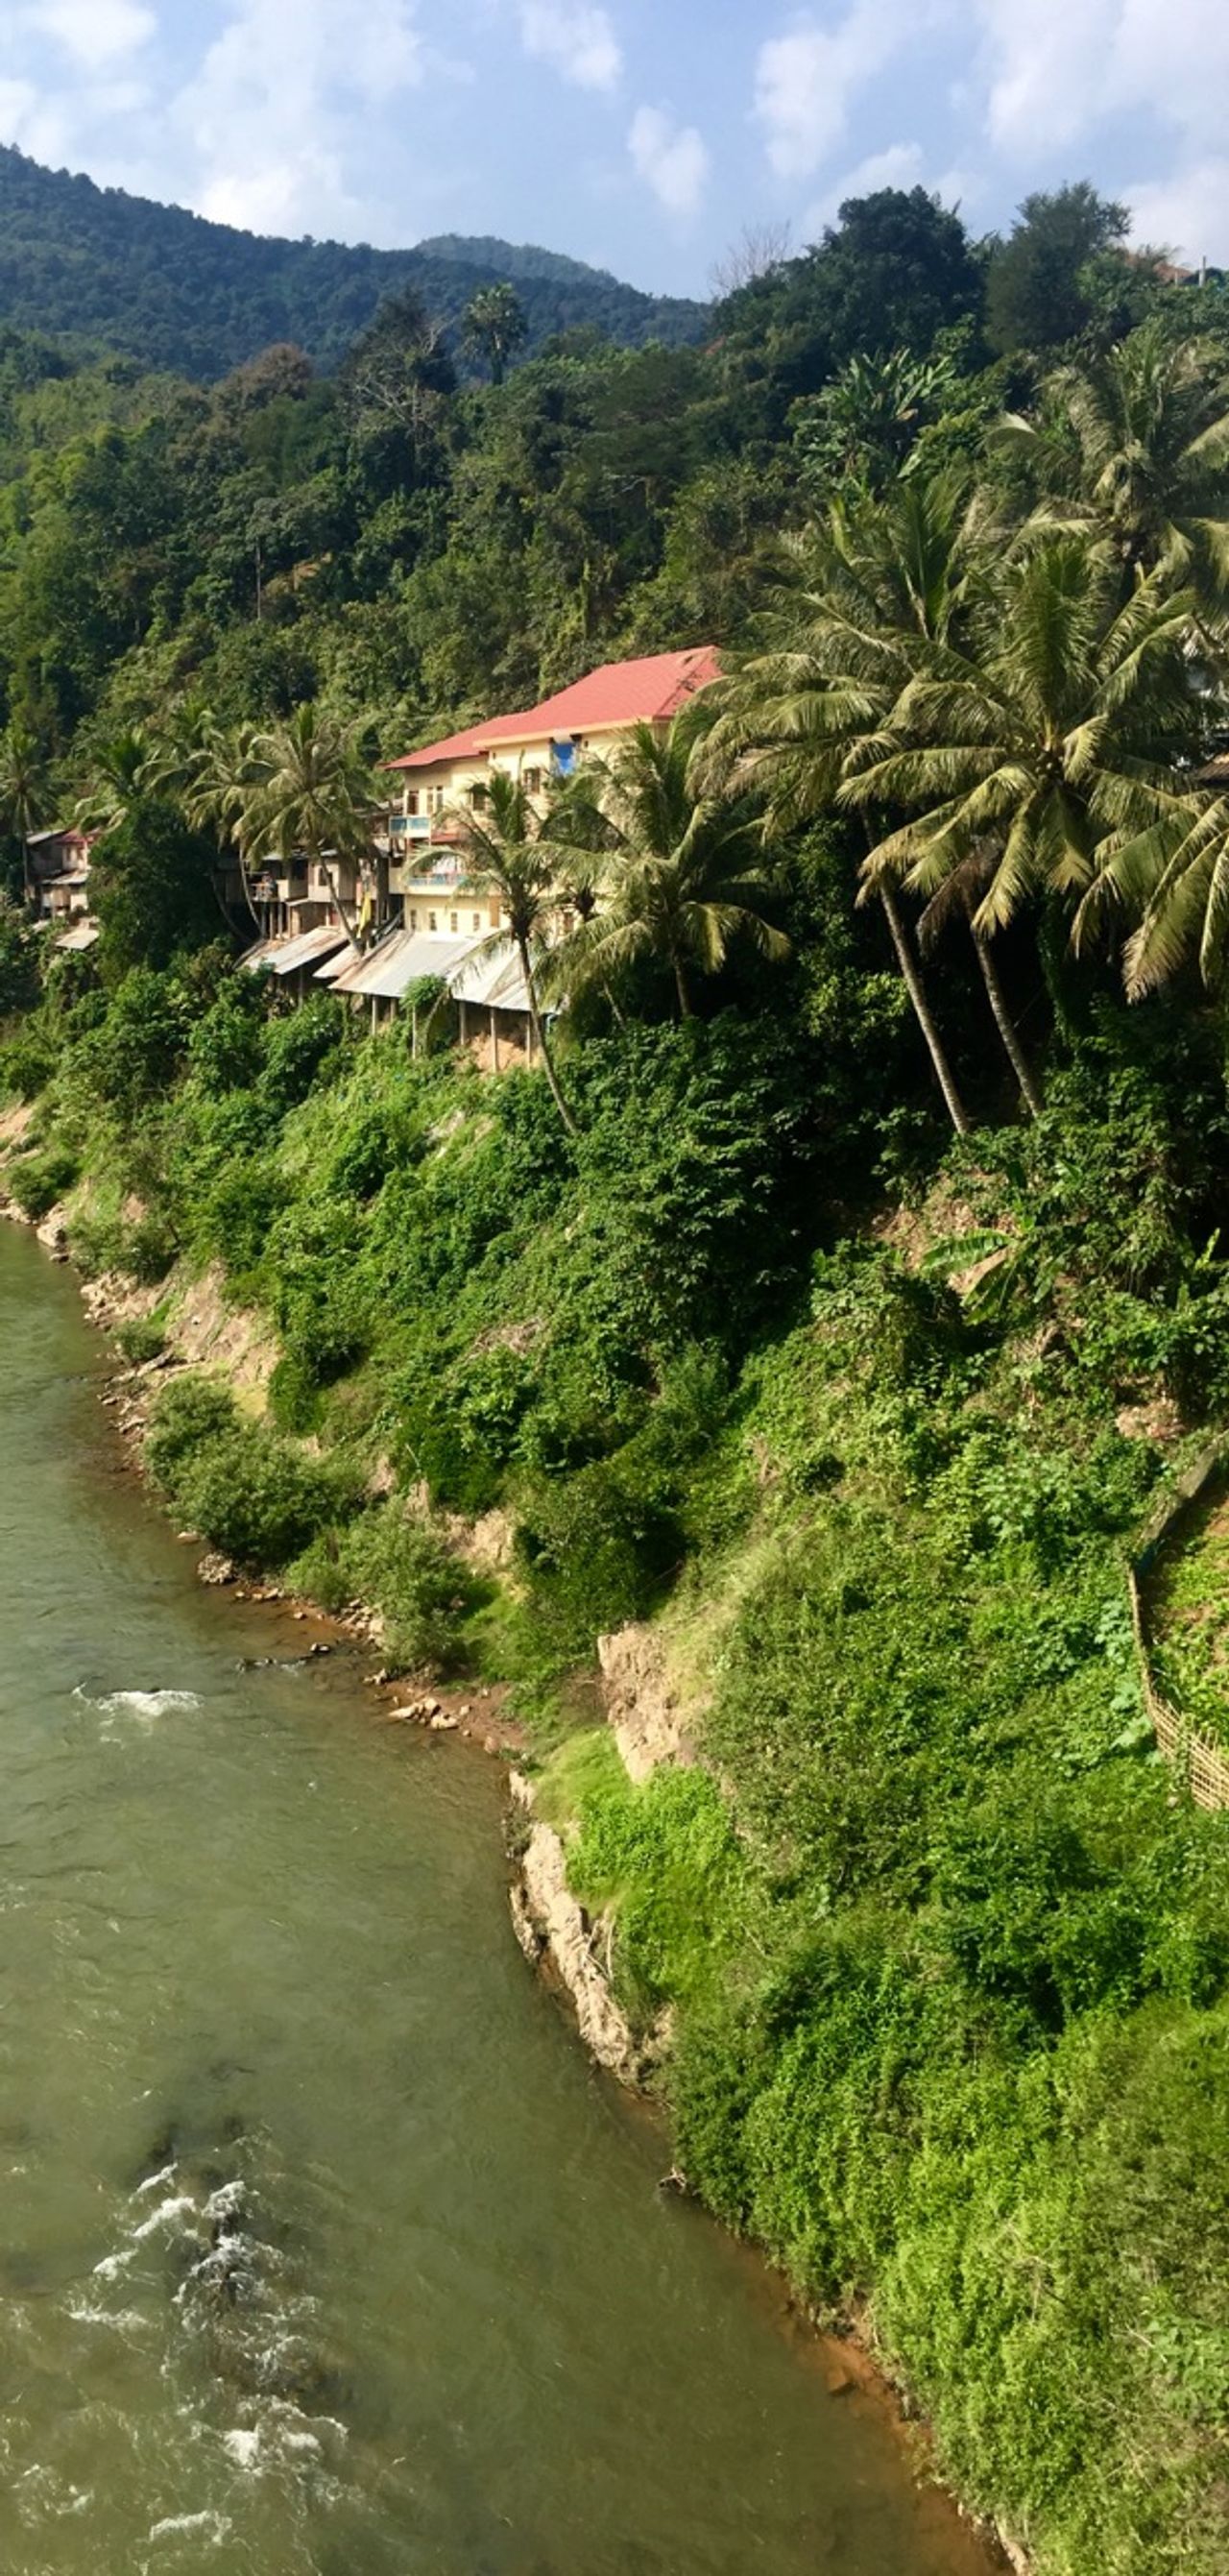 Houses along a river with a steep bank.